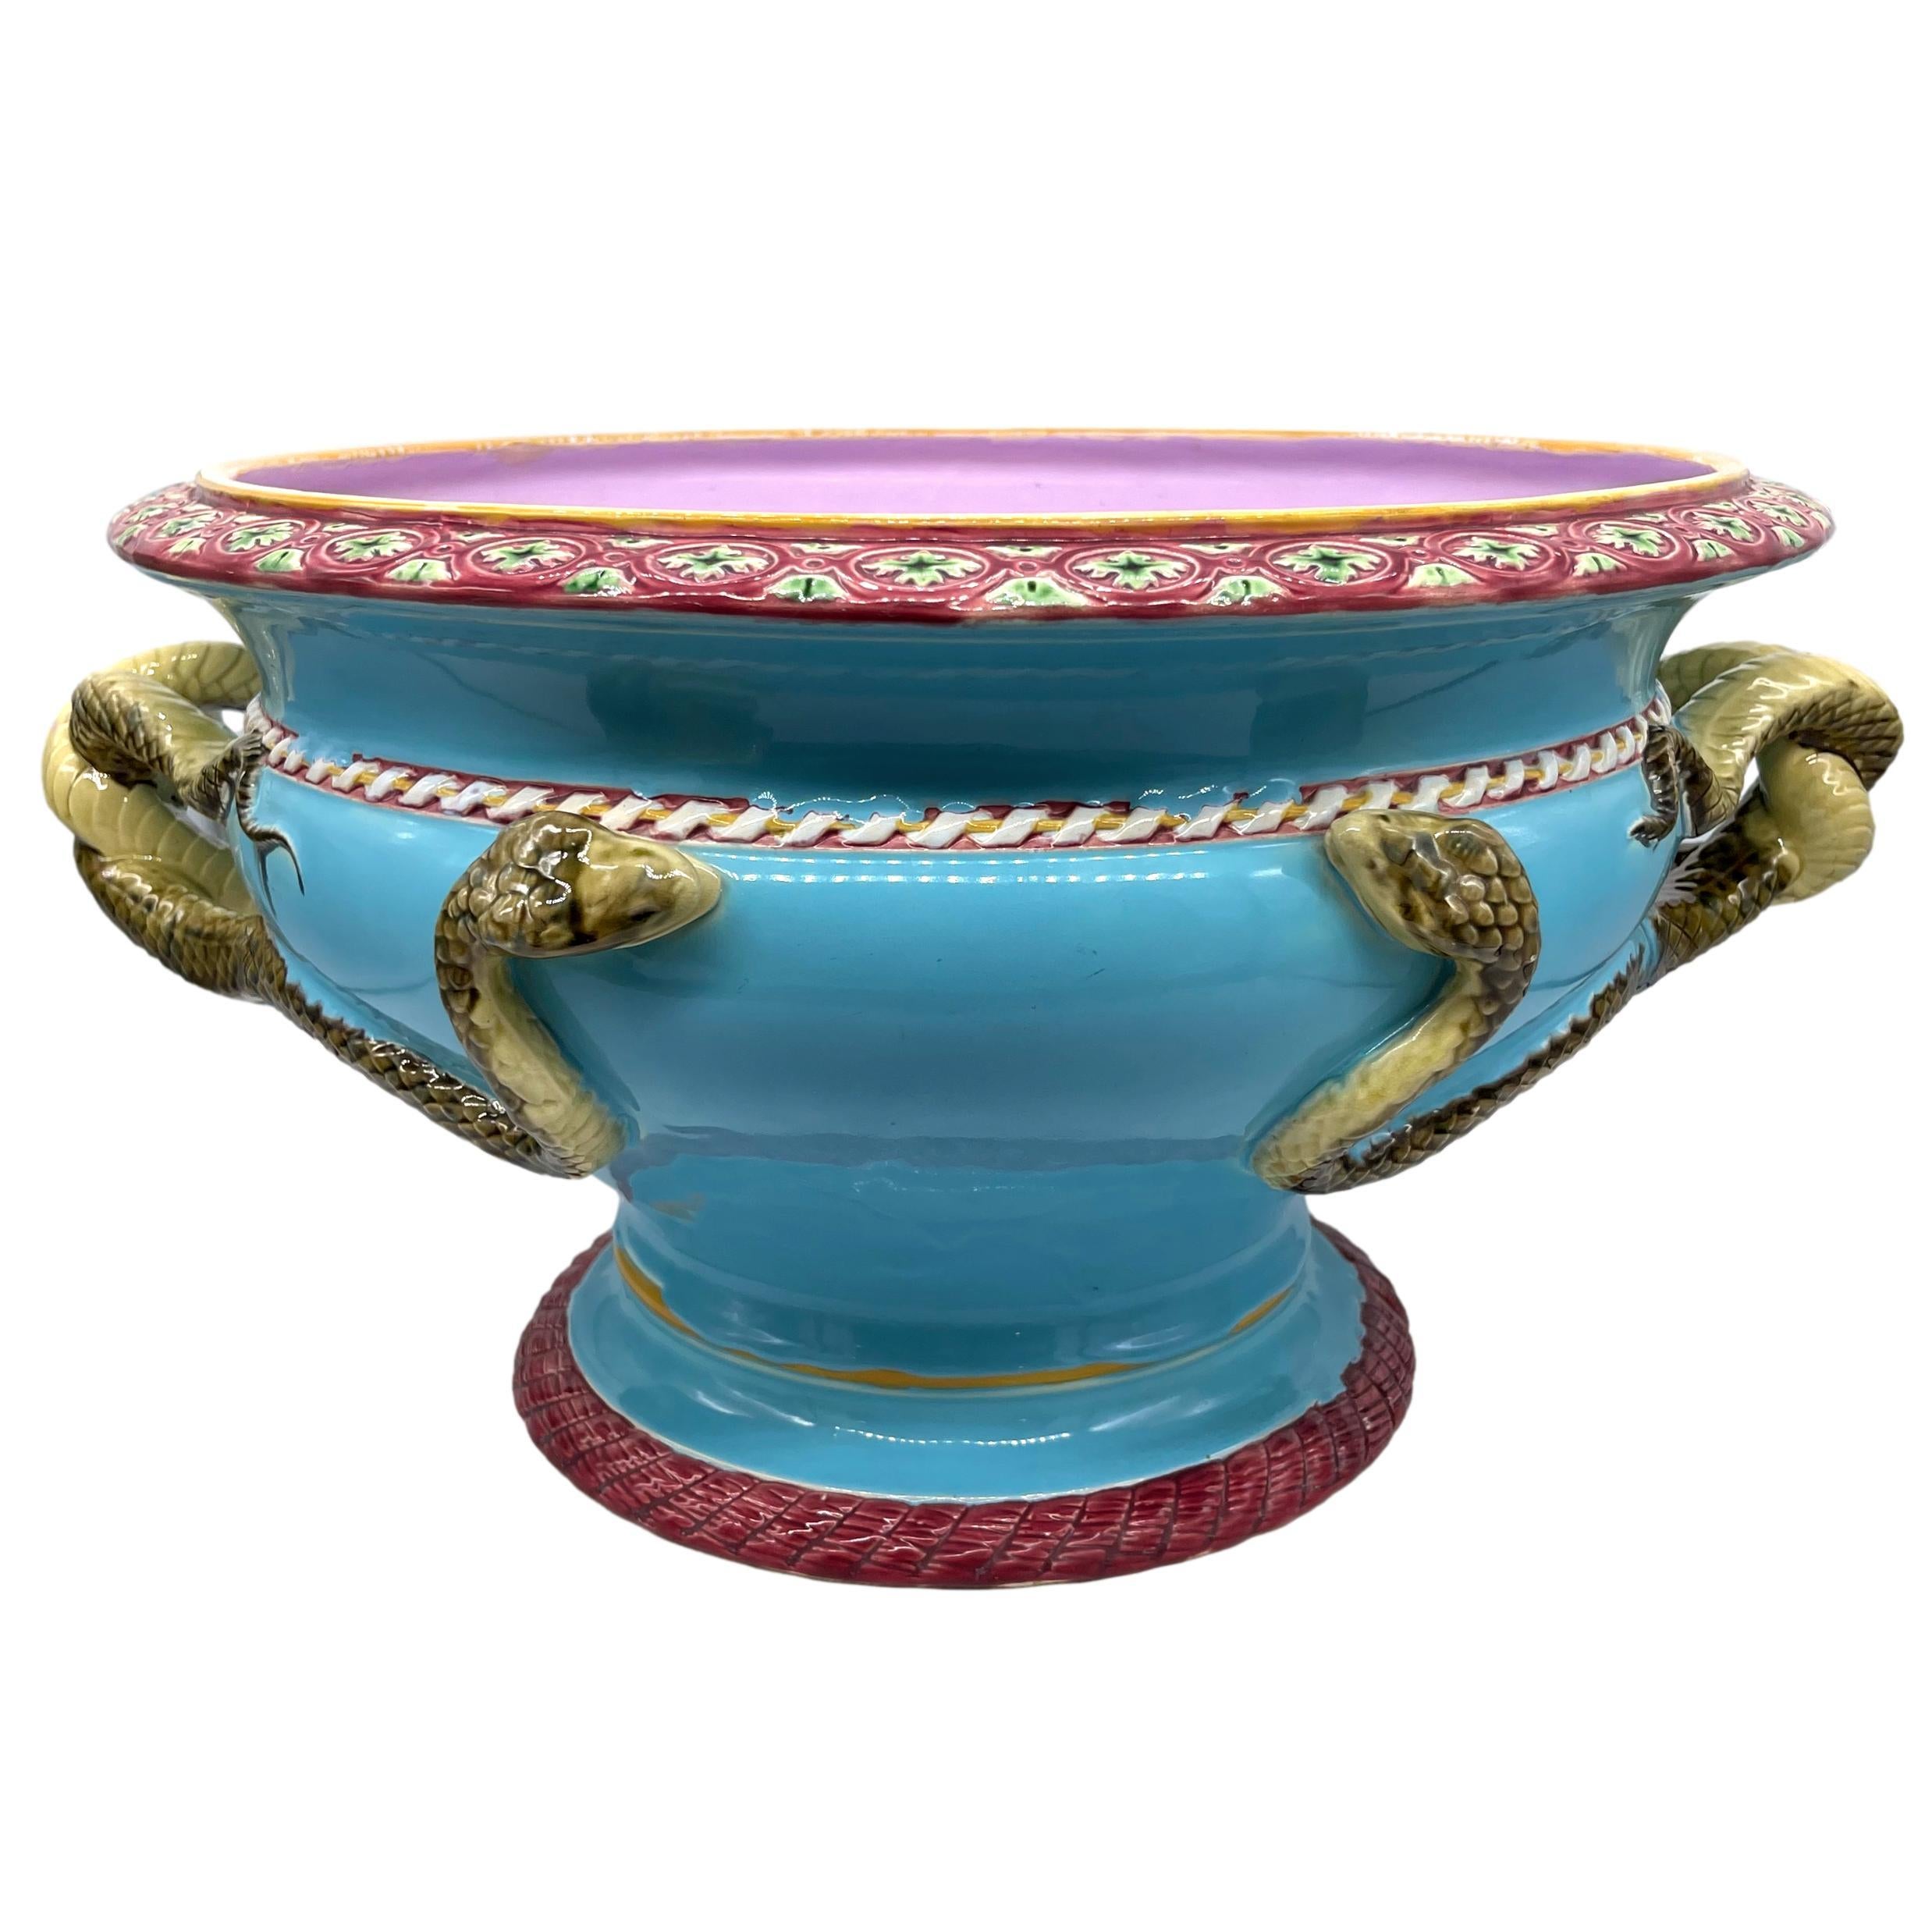 English A Minton Majolica Turquoise Ground Snake-Handled Jardinière, Dated 1858 For Sale